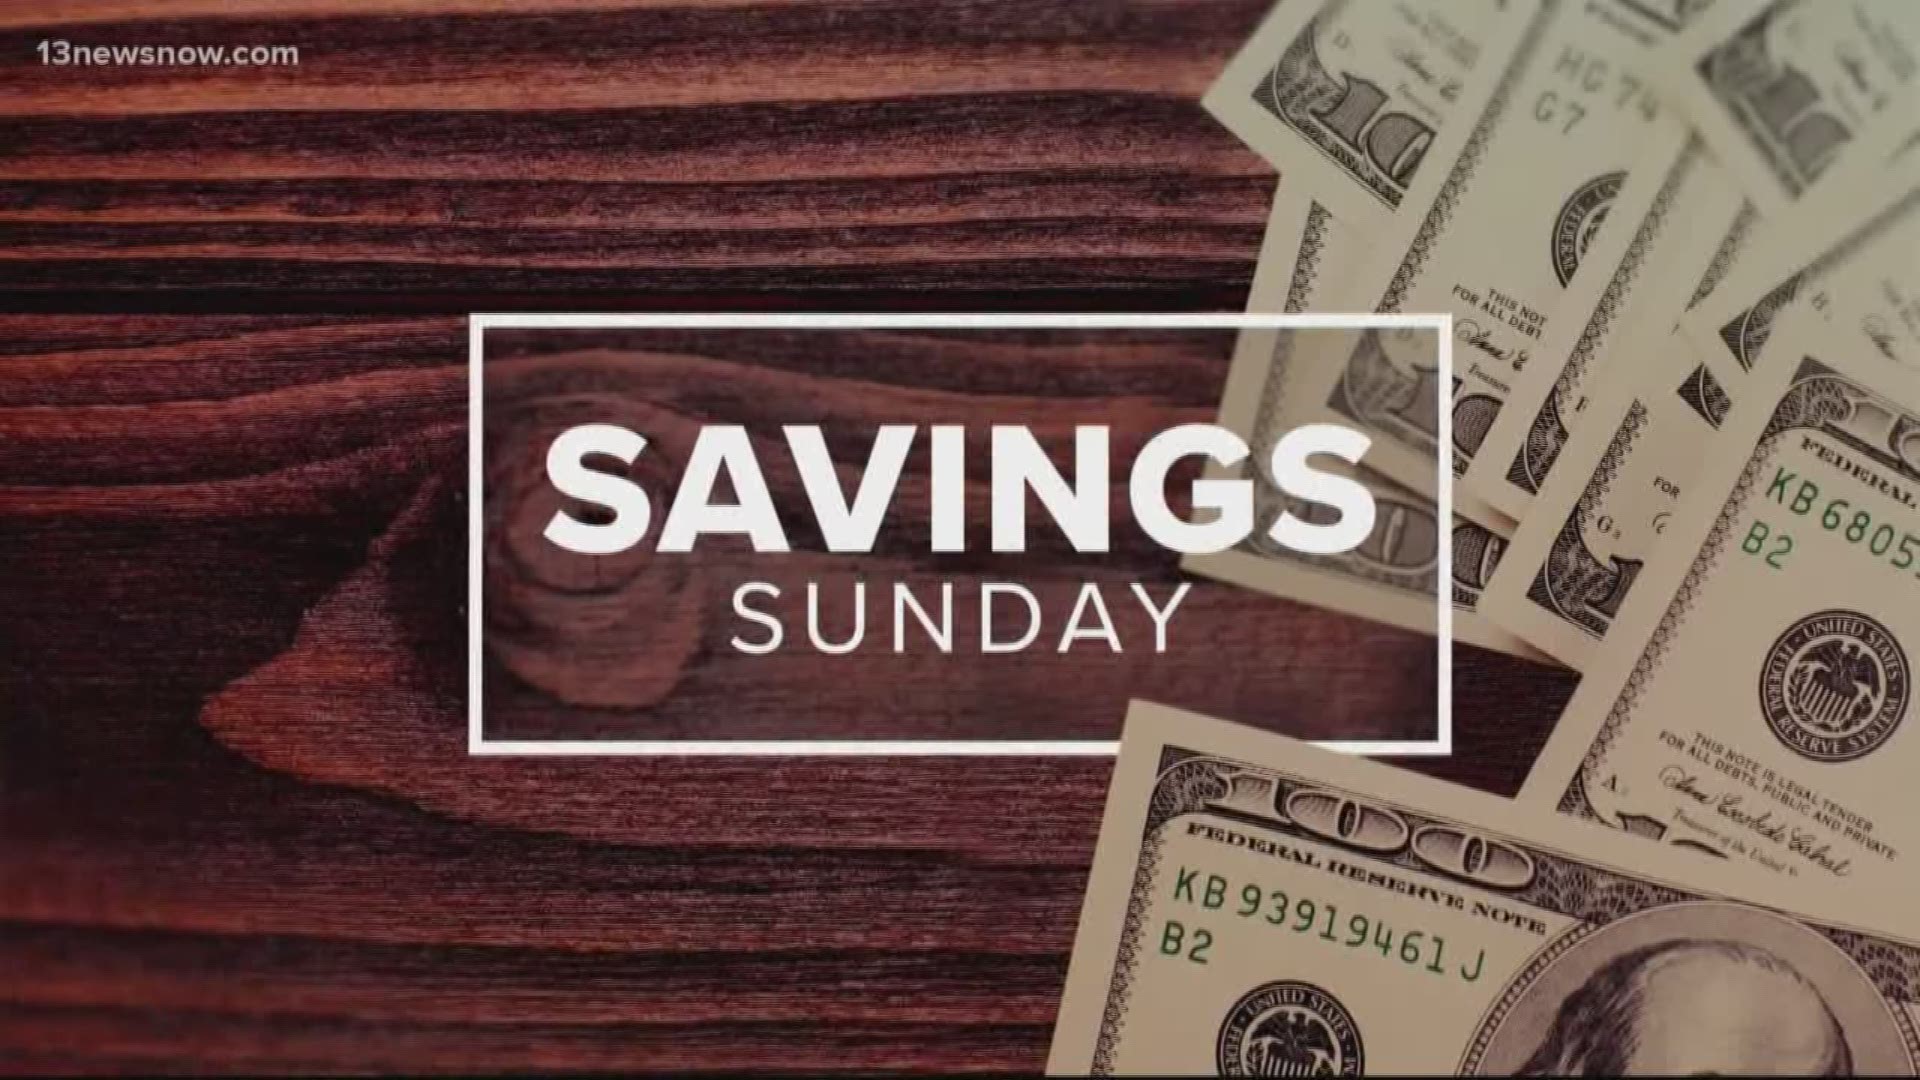 Savings Sunday: Deals for the week of April 5, 2020. See more deals at afrugalchick.com.